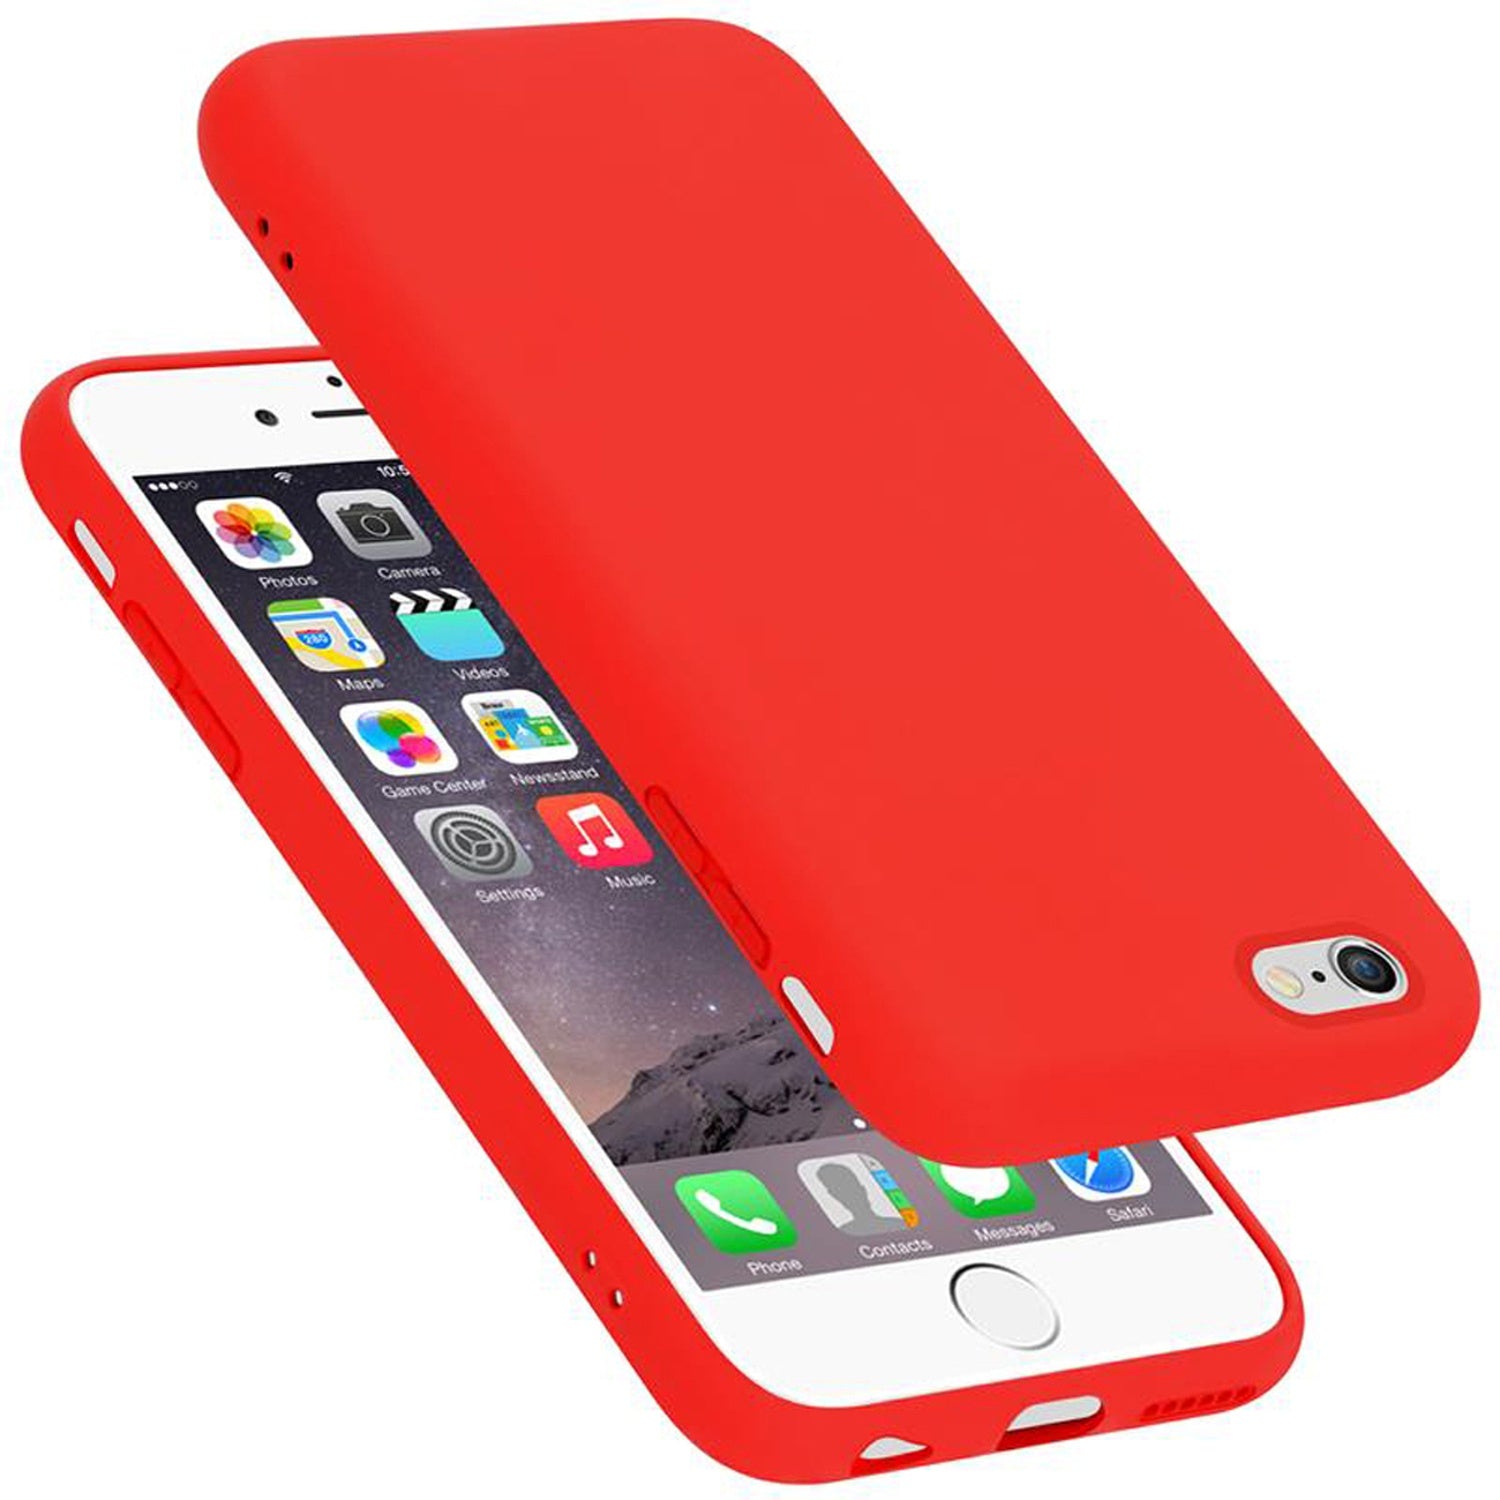 Cases For iPhone 5s saynama